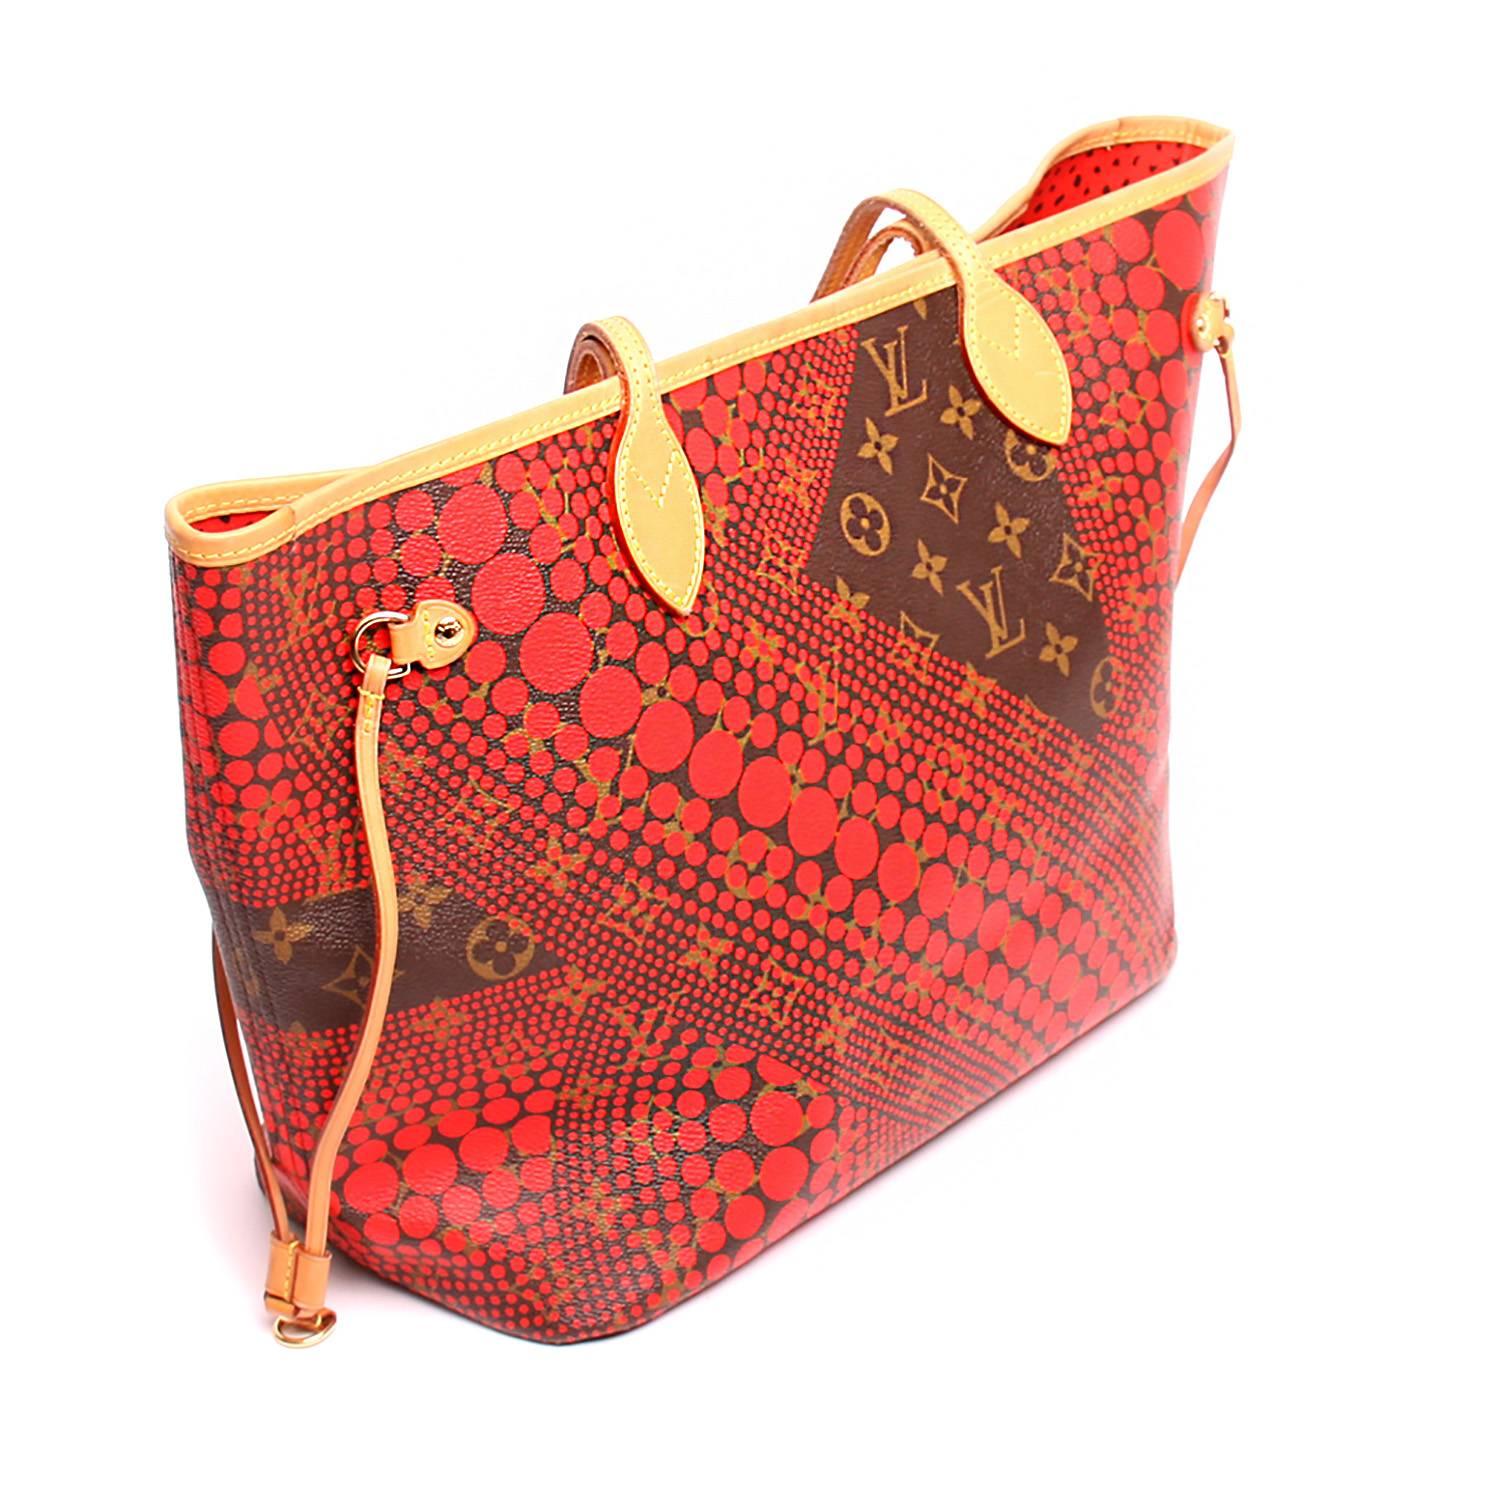 This beauty is from Louis Vuitton's Yayoi Kusama Collection, crafted with vibrant red wave dots above the traditional LV monogram design, vachetta leather trim, straps and drawstrings, accented with gold-tone hardware. Interior features a convenient